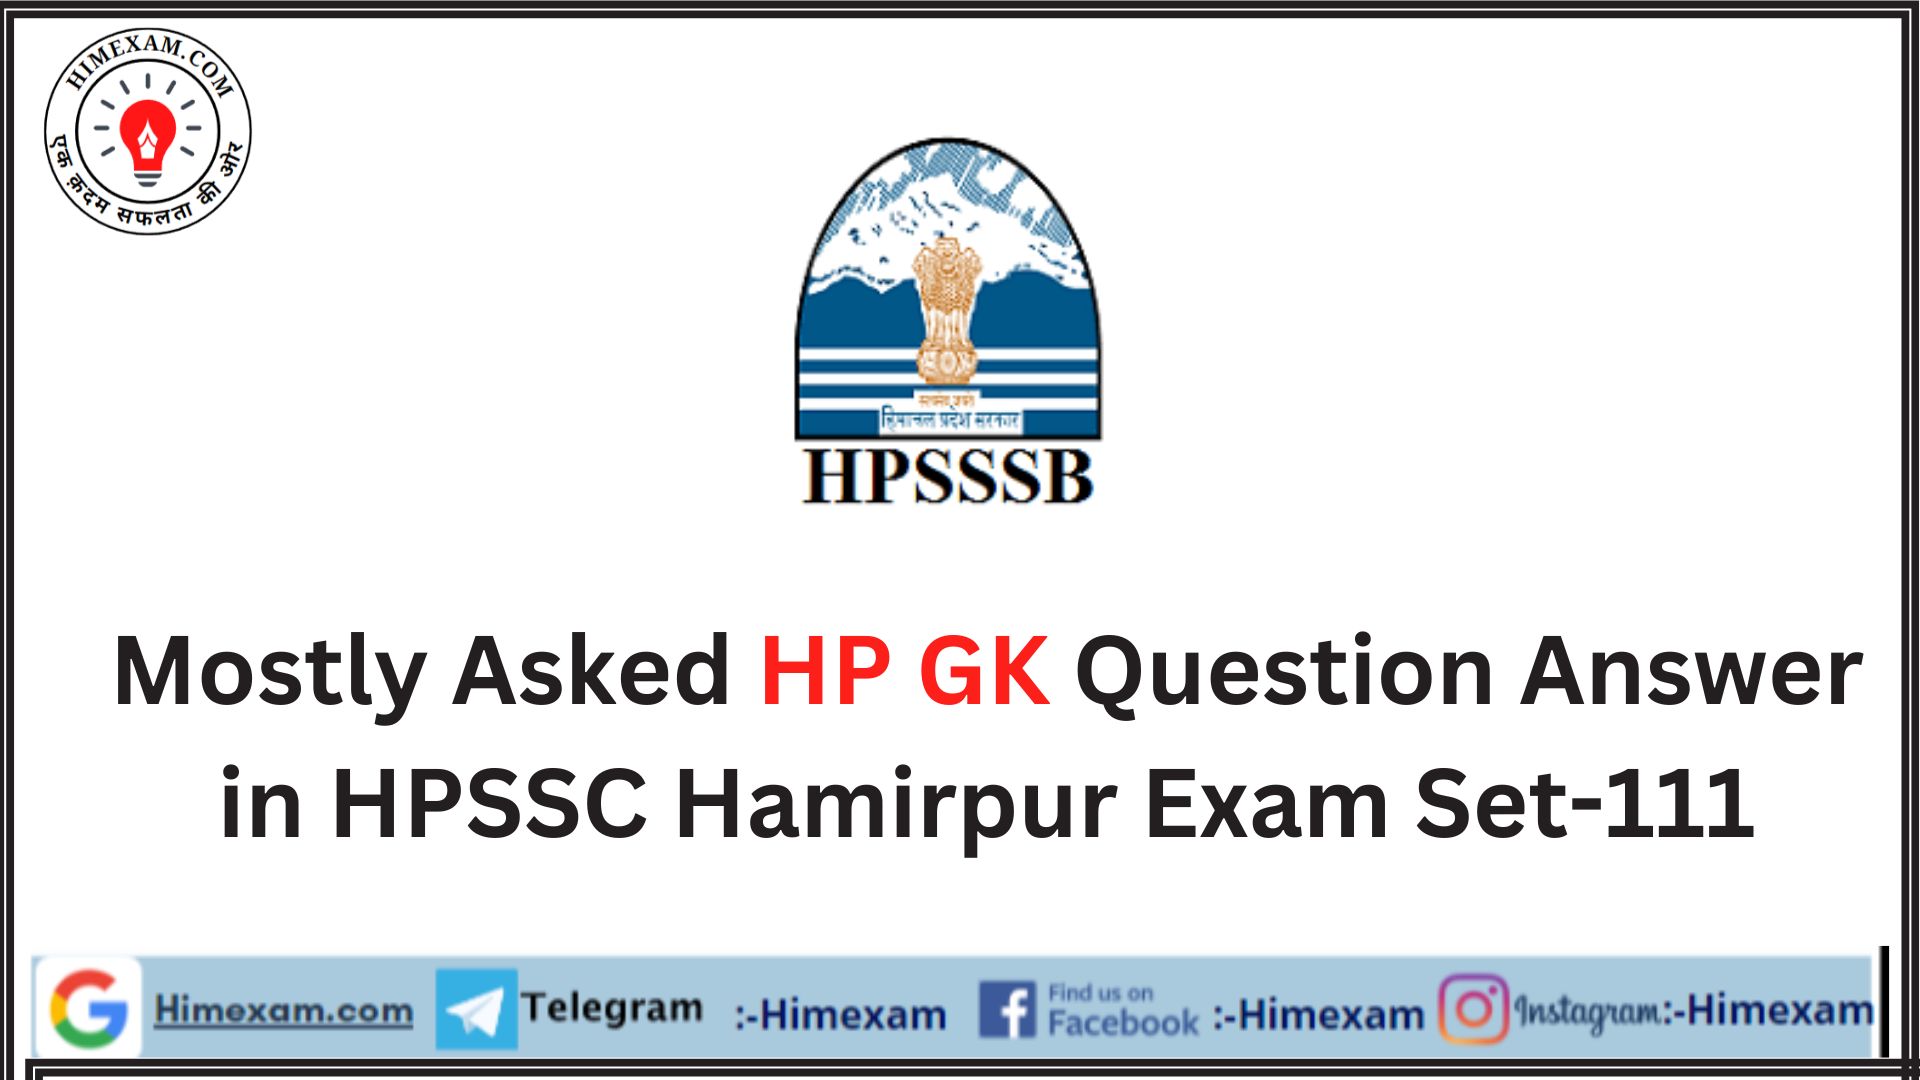 Mostly Asked HP GK Question Answer in HPSSC Hamirpur Exam Set-111